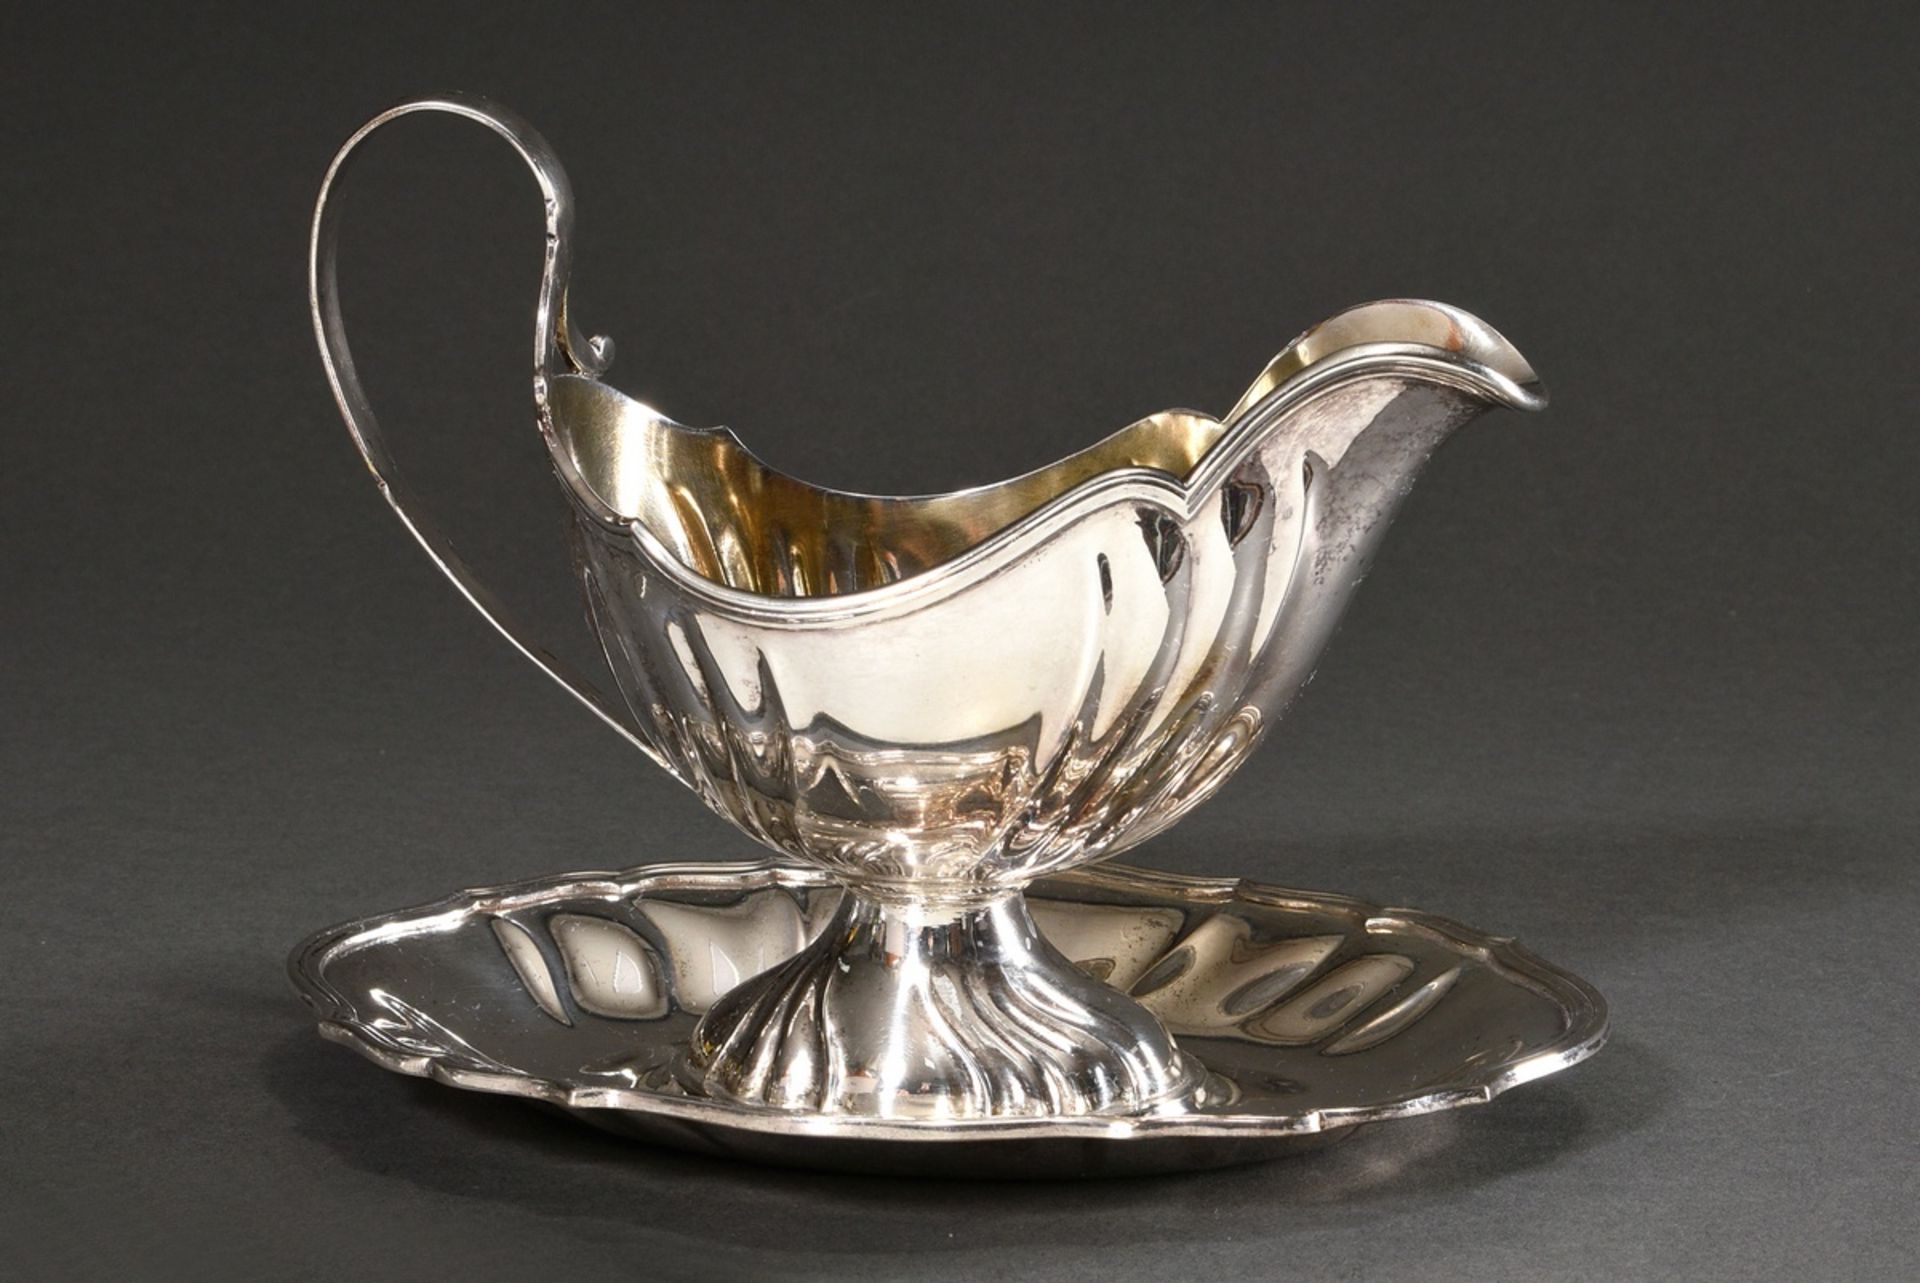 Sauciere with curved features on a base, Wilkens, jeweler's mark: Jos. Lortz, silver 800 inside gil - Image 2 of 8